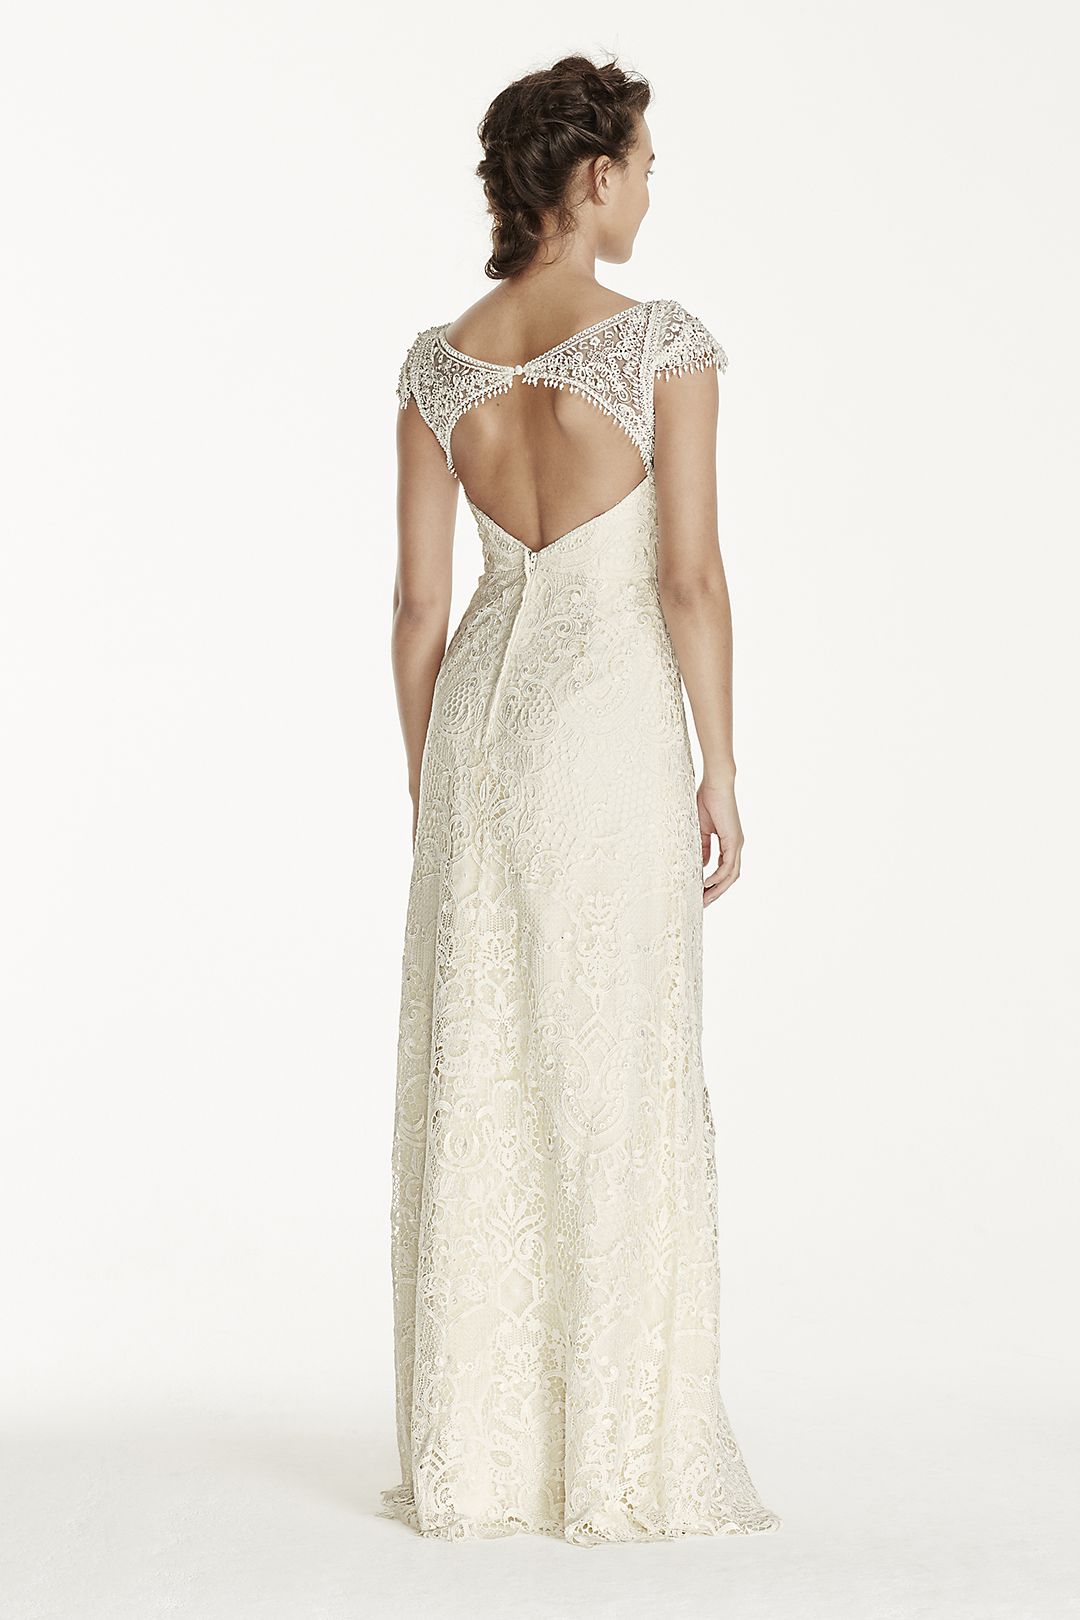 As-Is Cap Sleeve Beaded Lace Wedding Dress Image 2